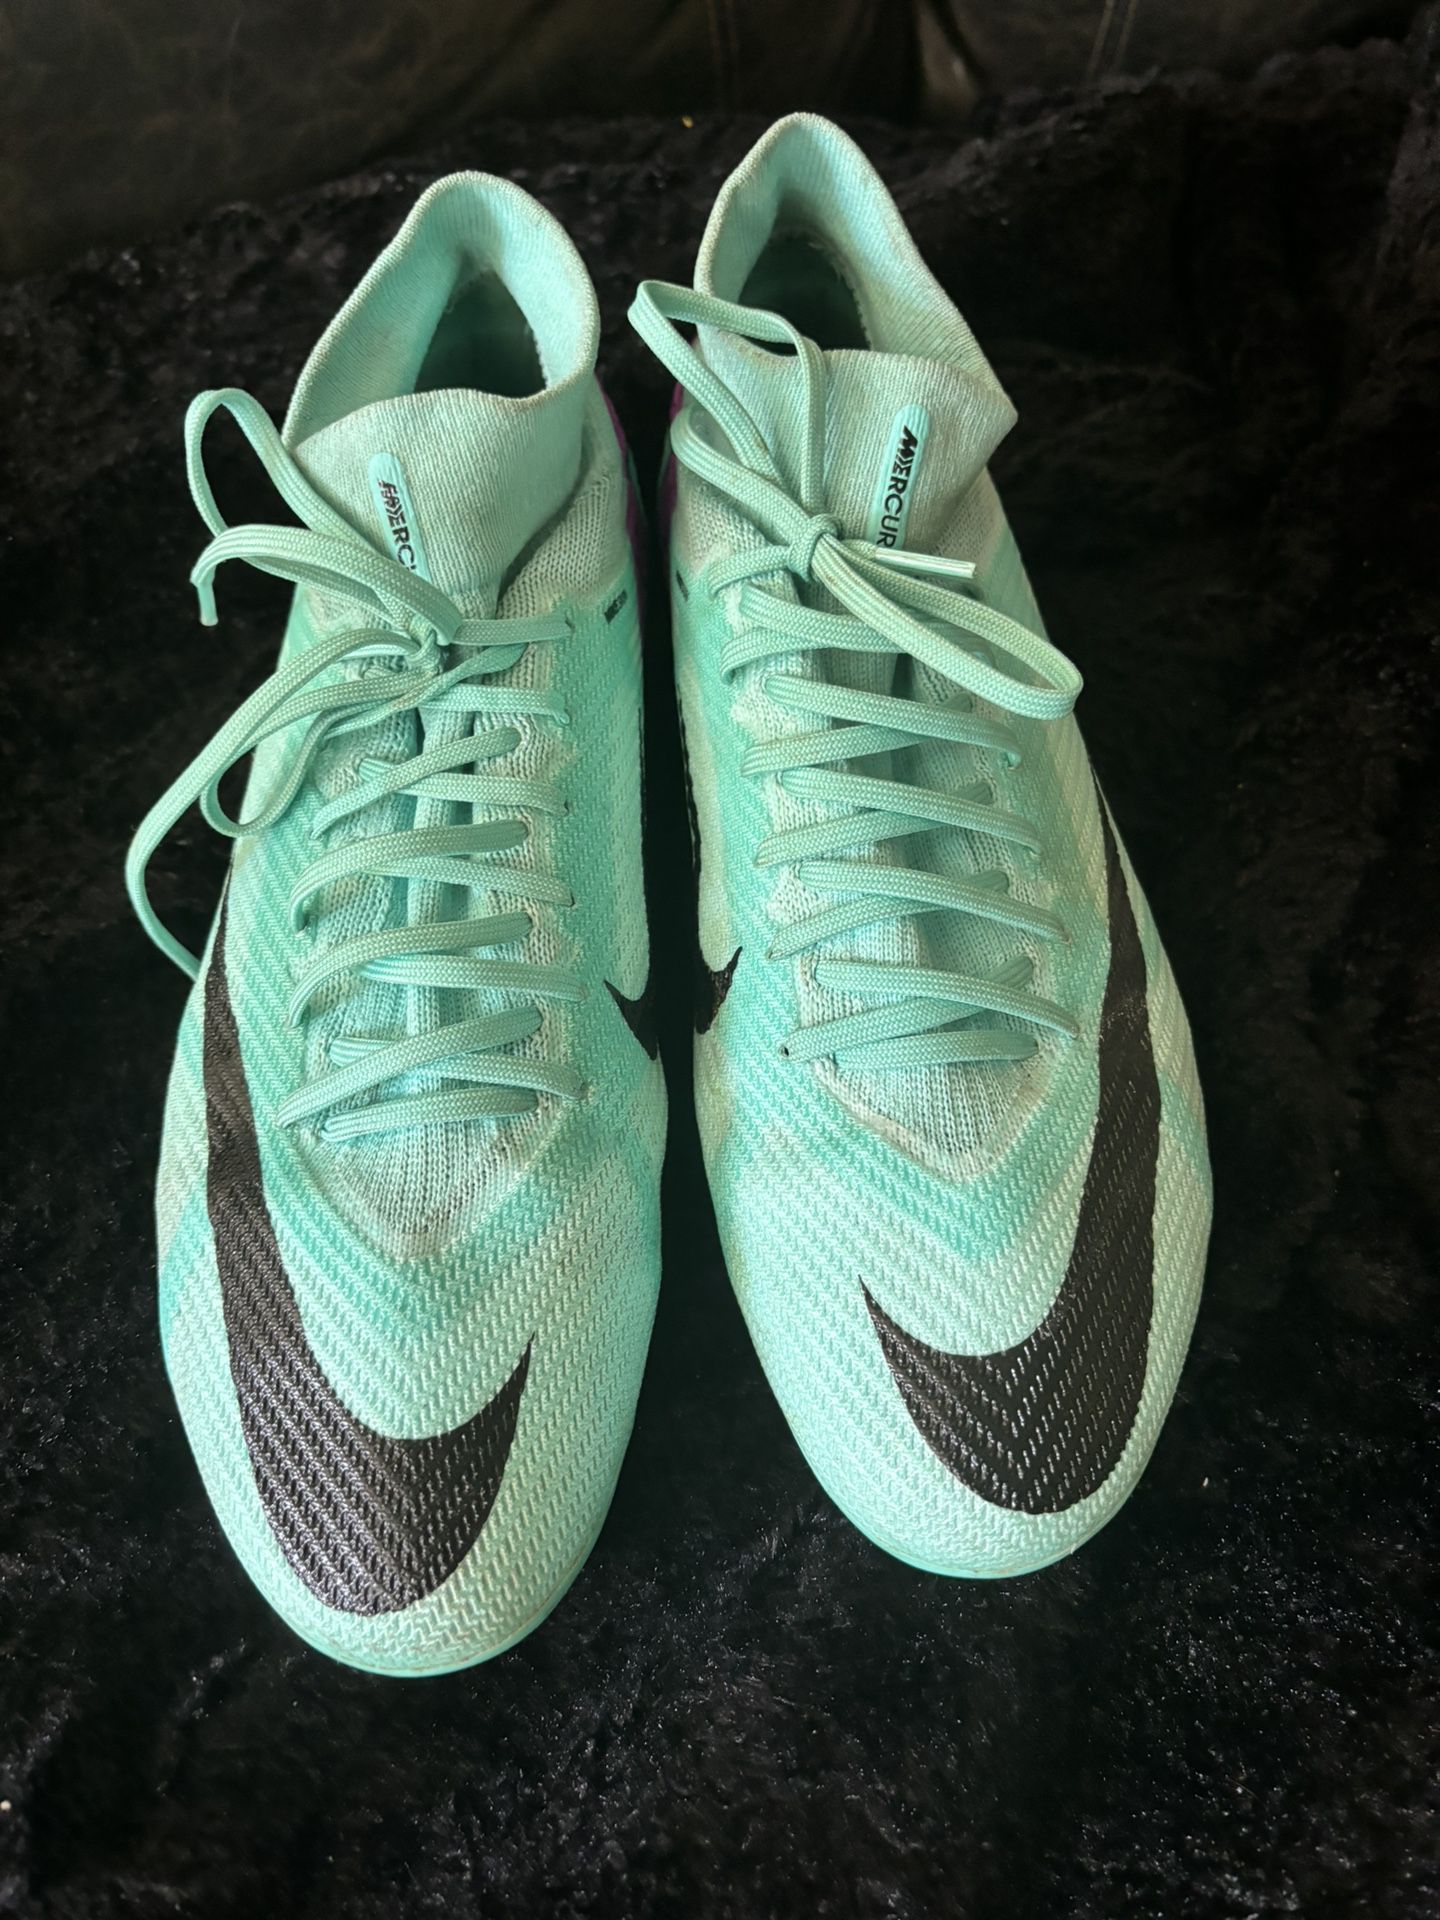 Soccer Cleats Size 11